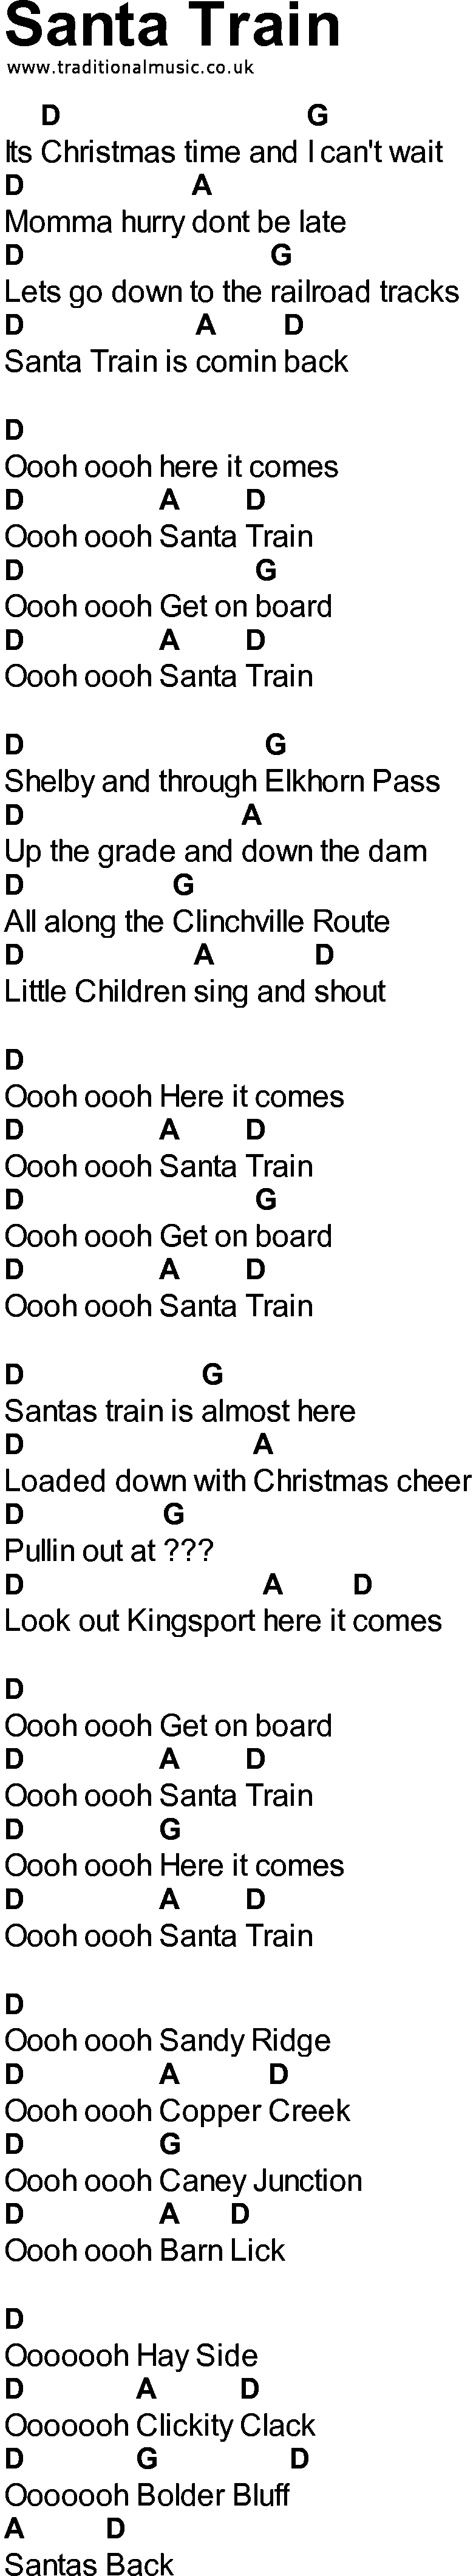 Bluegrass songs with chords - Santa Train